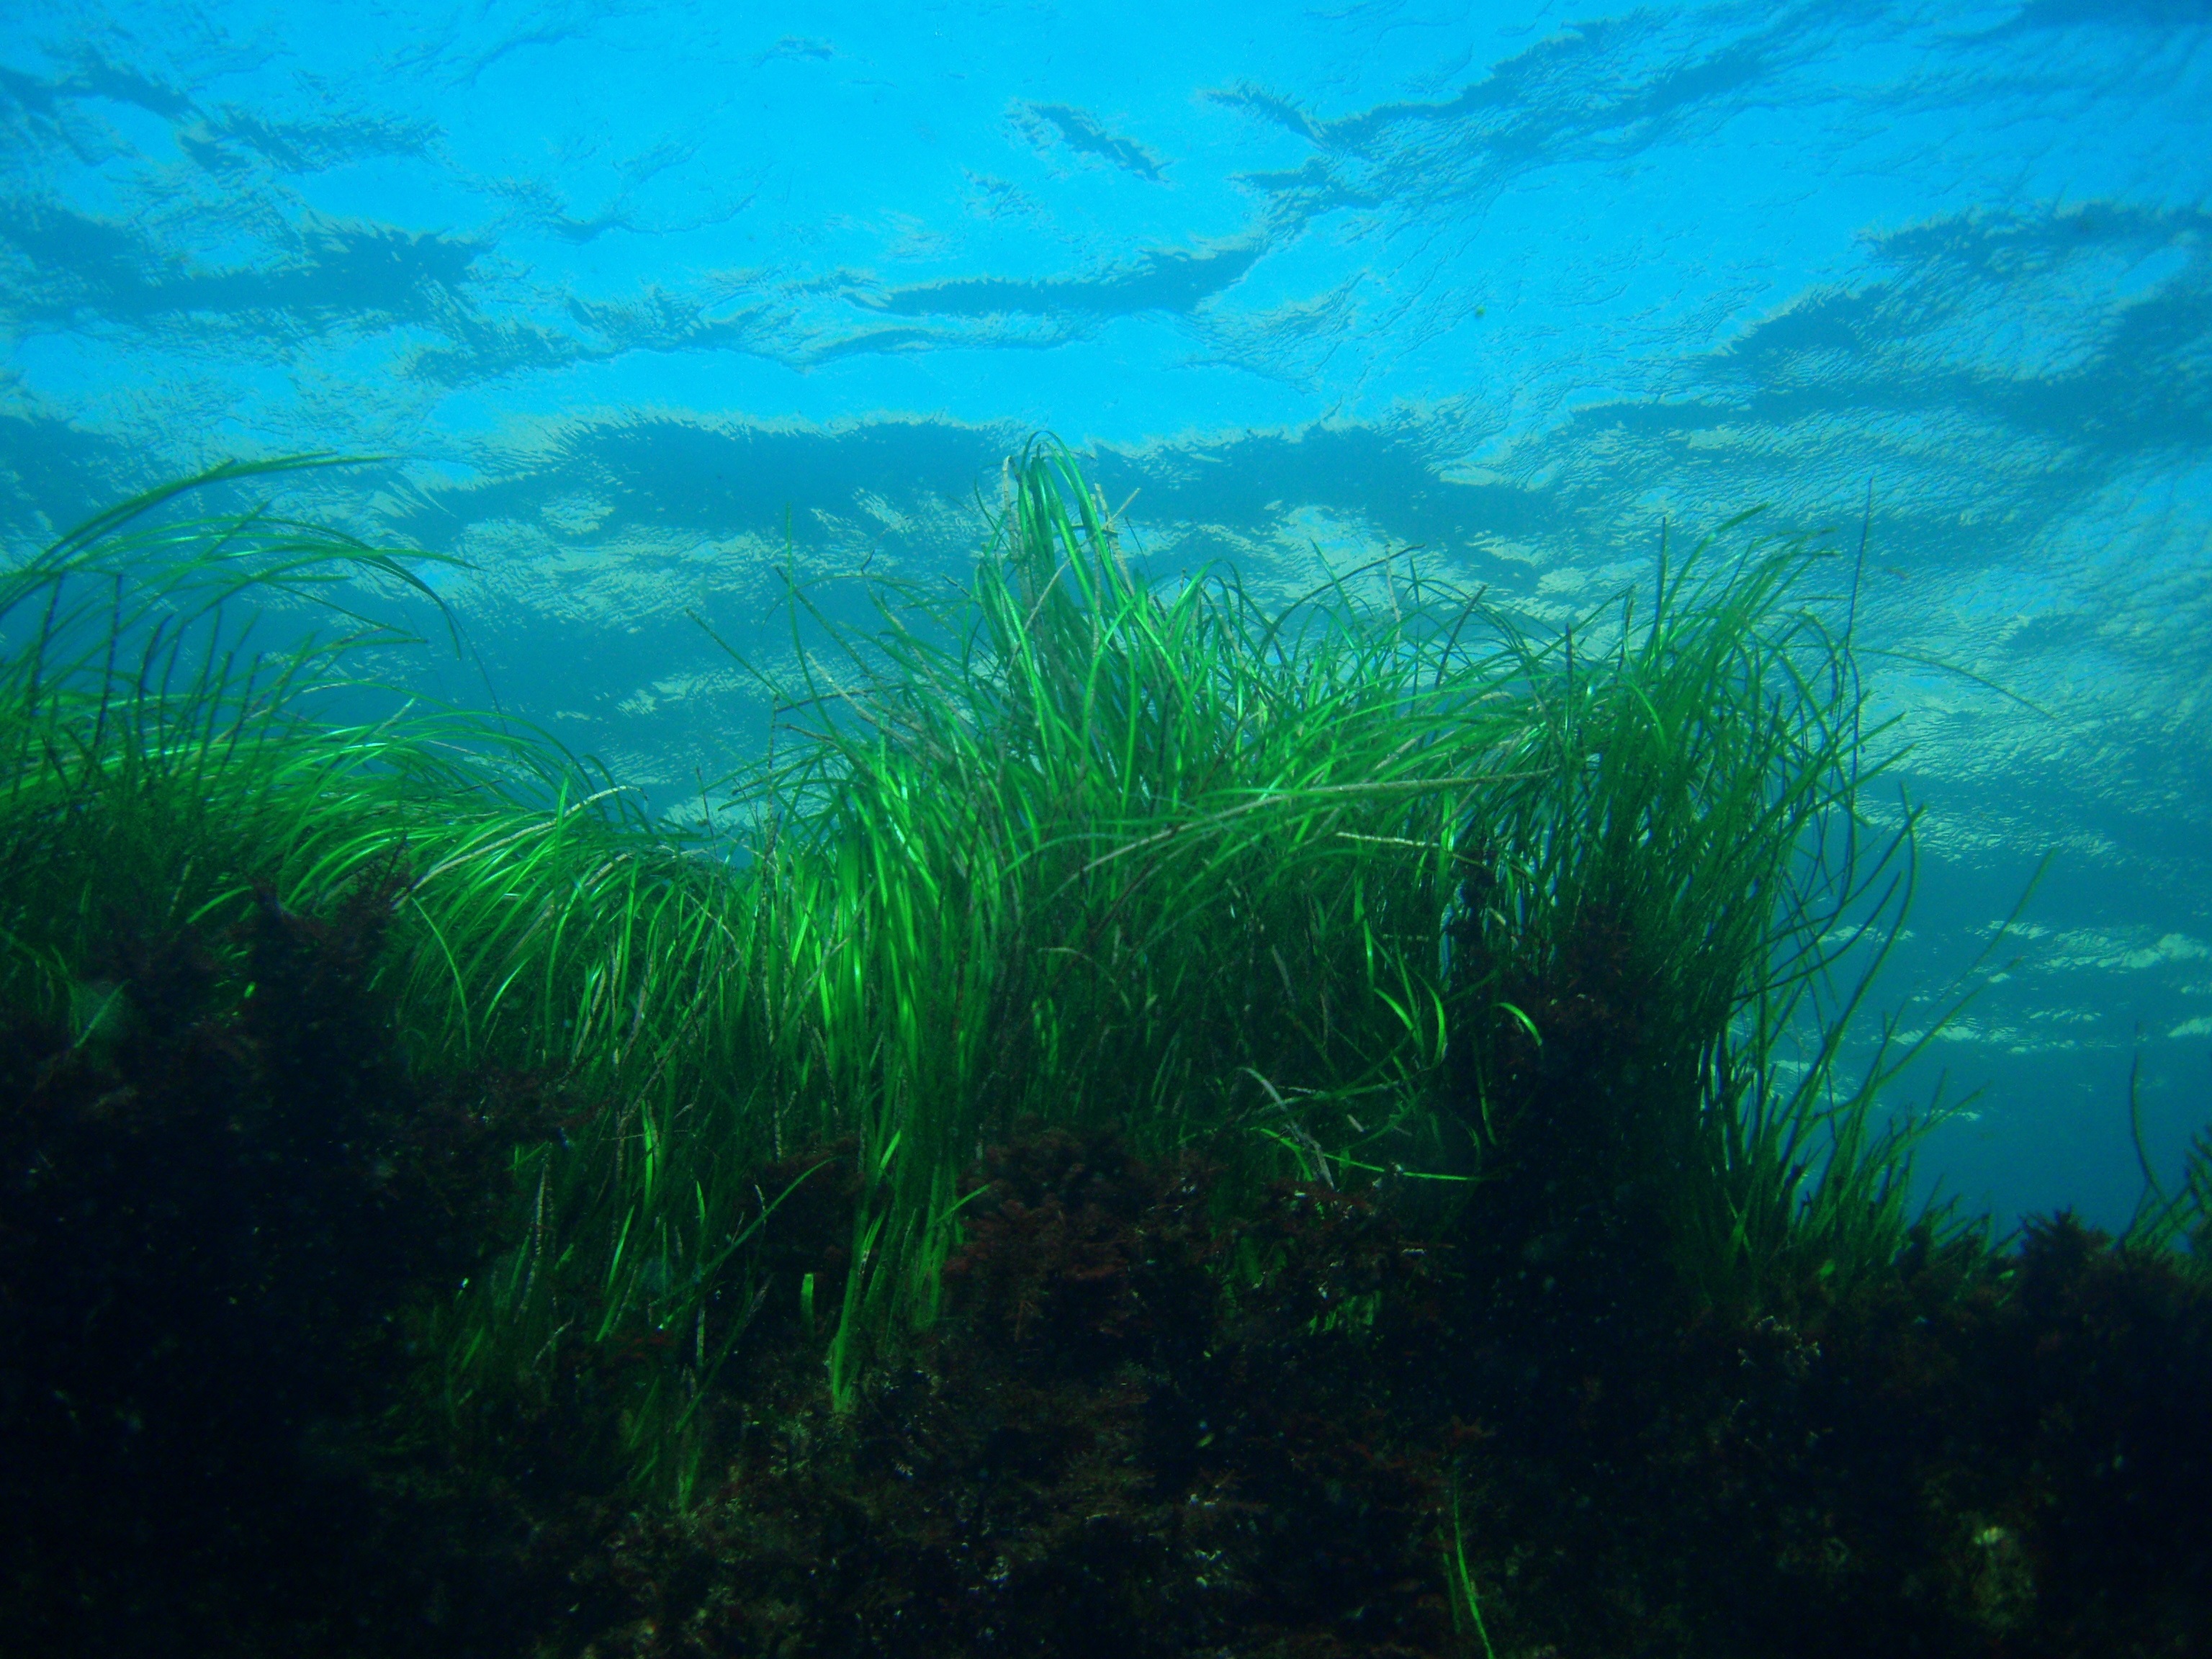 Seagrass. California, Channel Islands NMS. Claire Fackler, CINMS, NOAA.